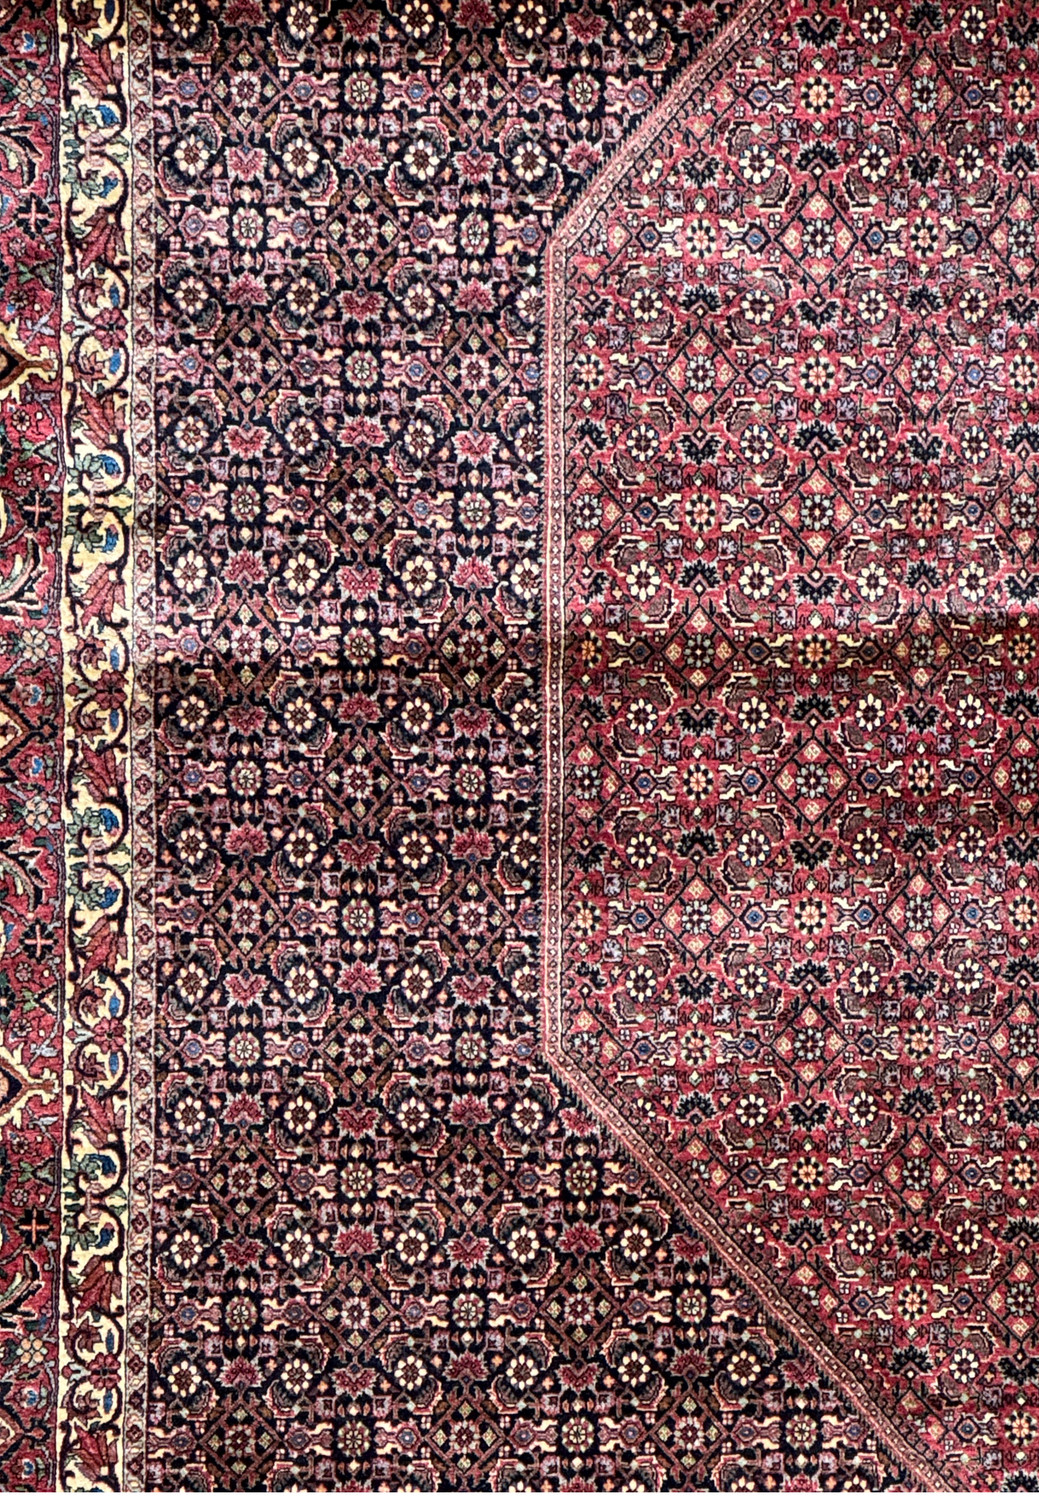 Detailed perspective of the Persian Bijar rug's corner, showing the exquisite border design with floral motifs in contrasting colors